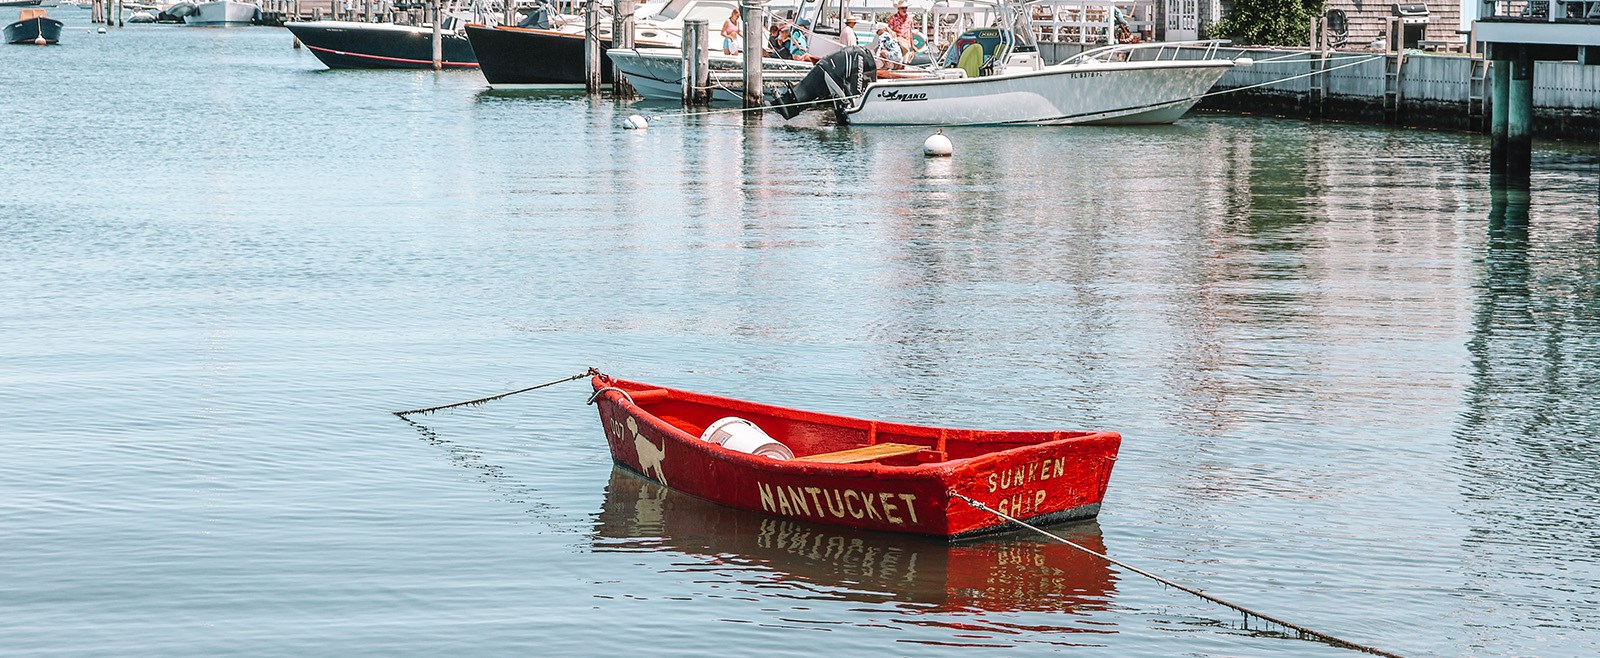 The summertime spirit is alive and well on Nantucket! Check out the signature events below that are guaranteed to get you excited for high season on the island!